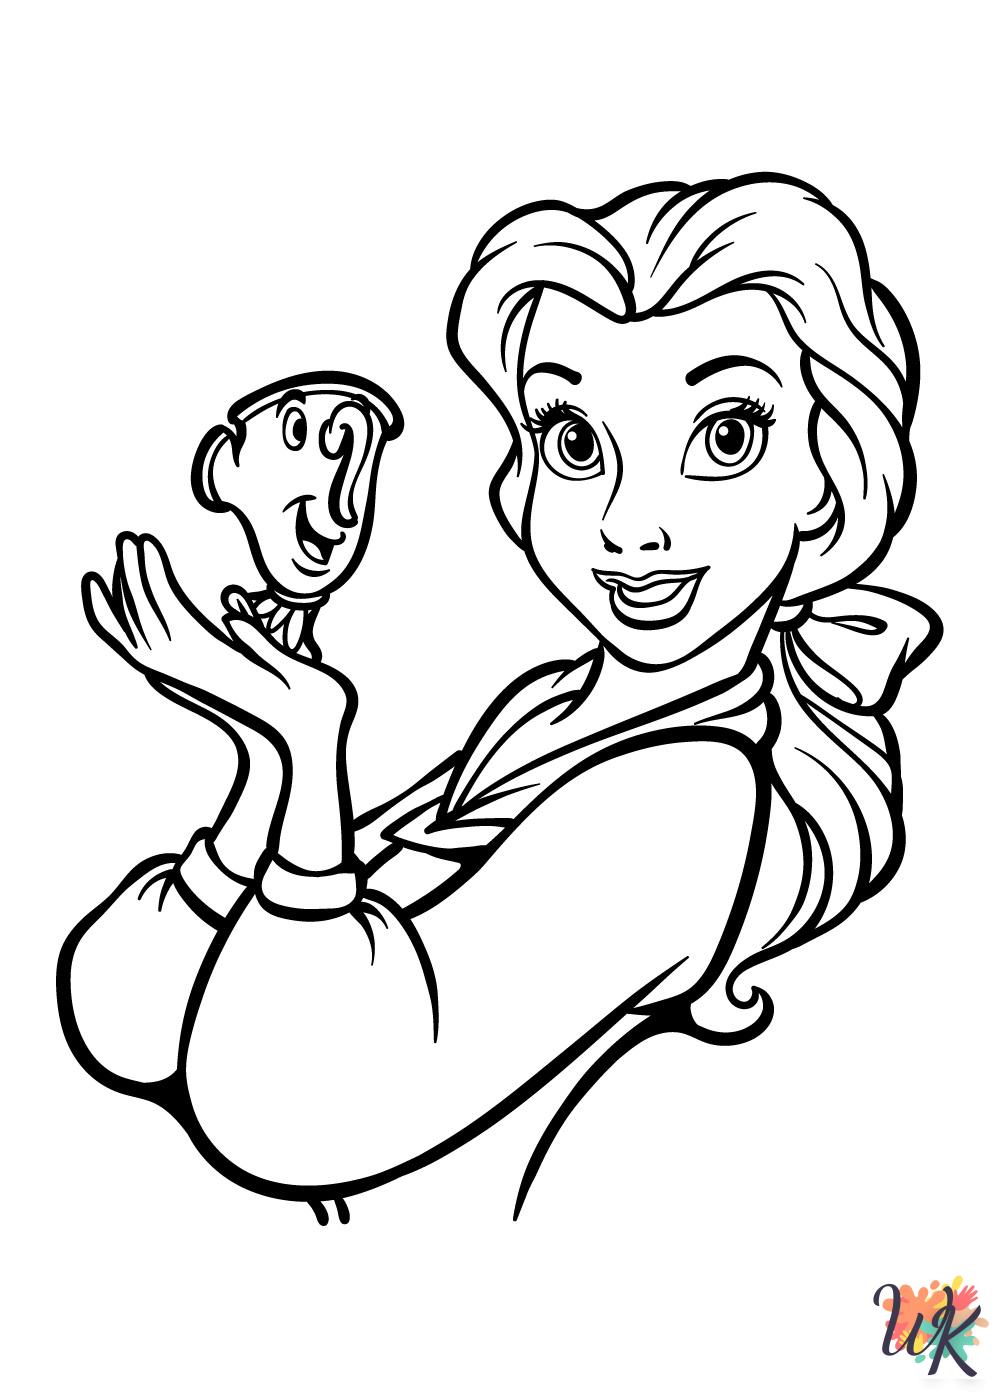 Belle coloring pages free printable